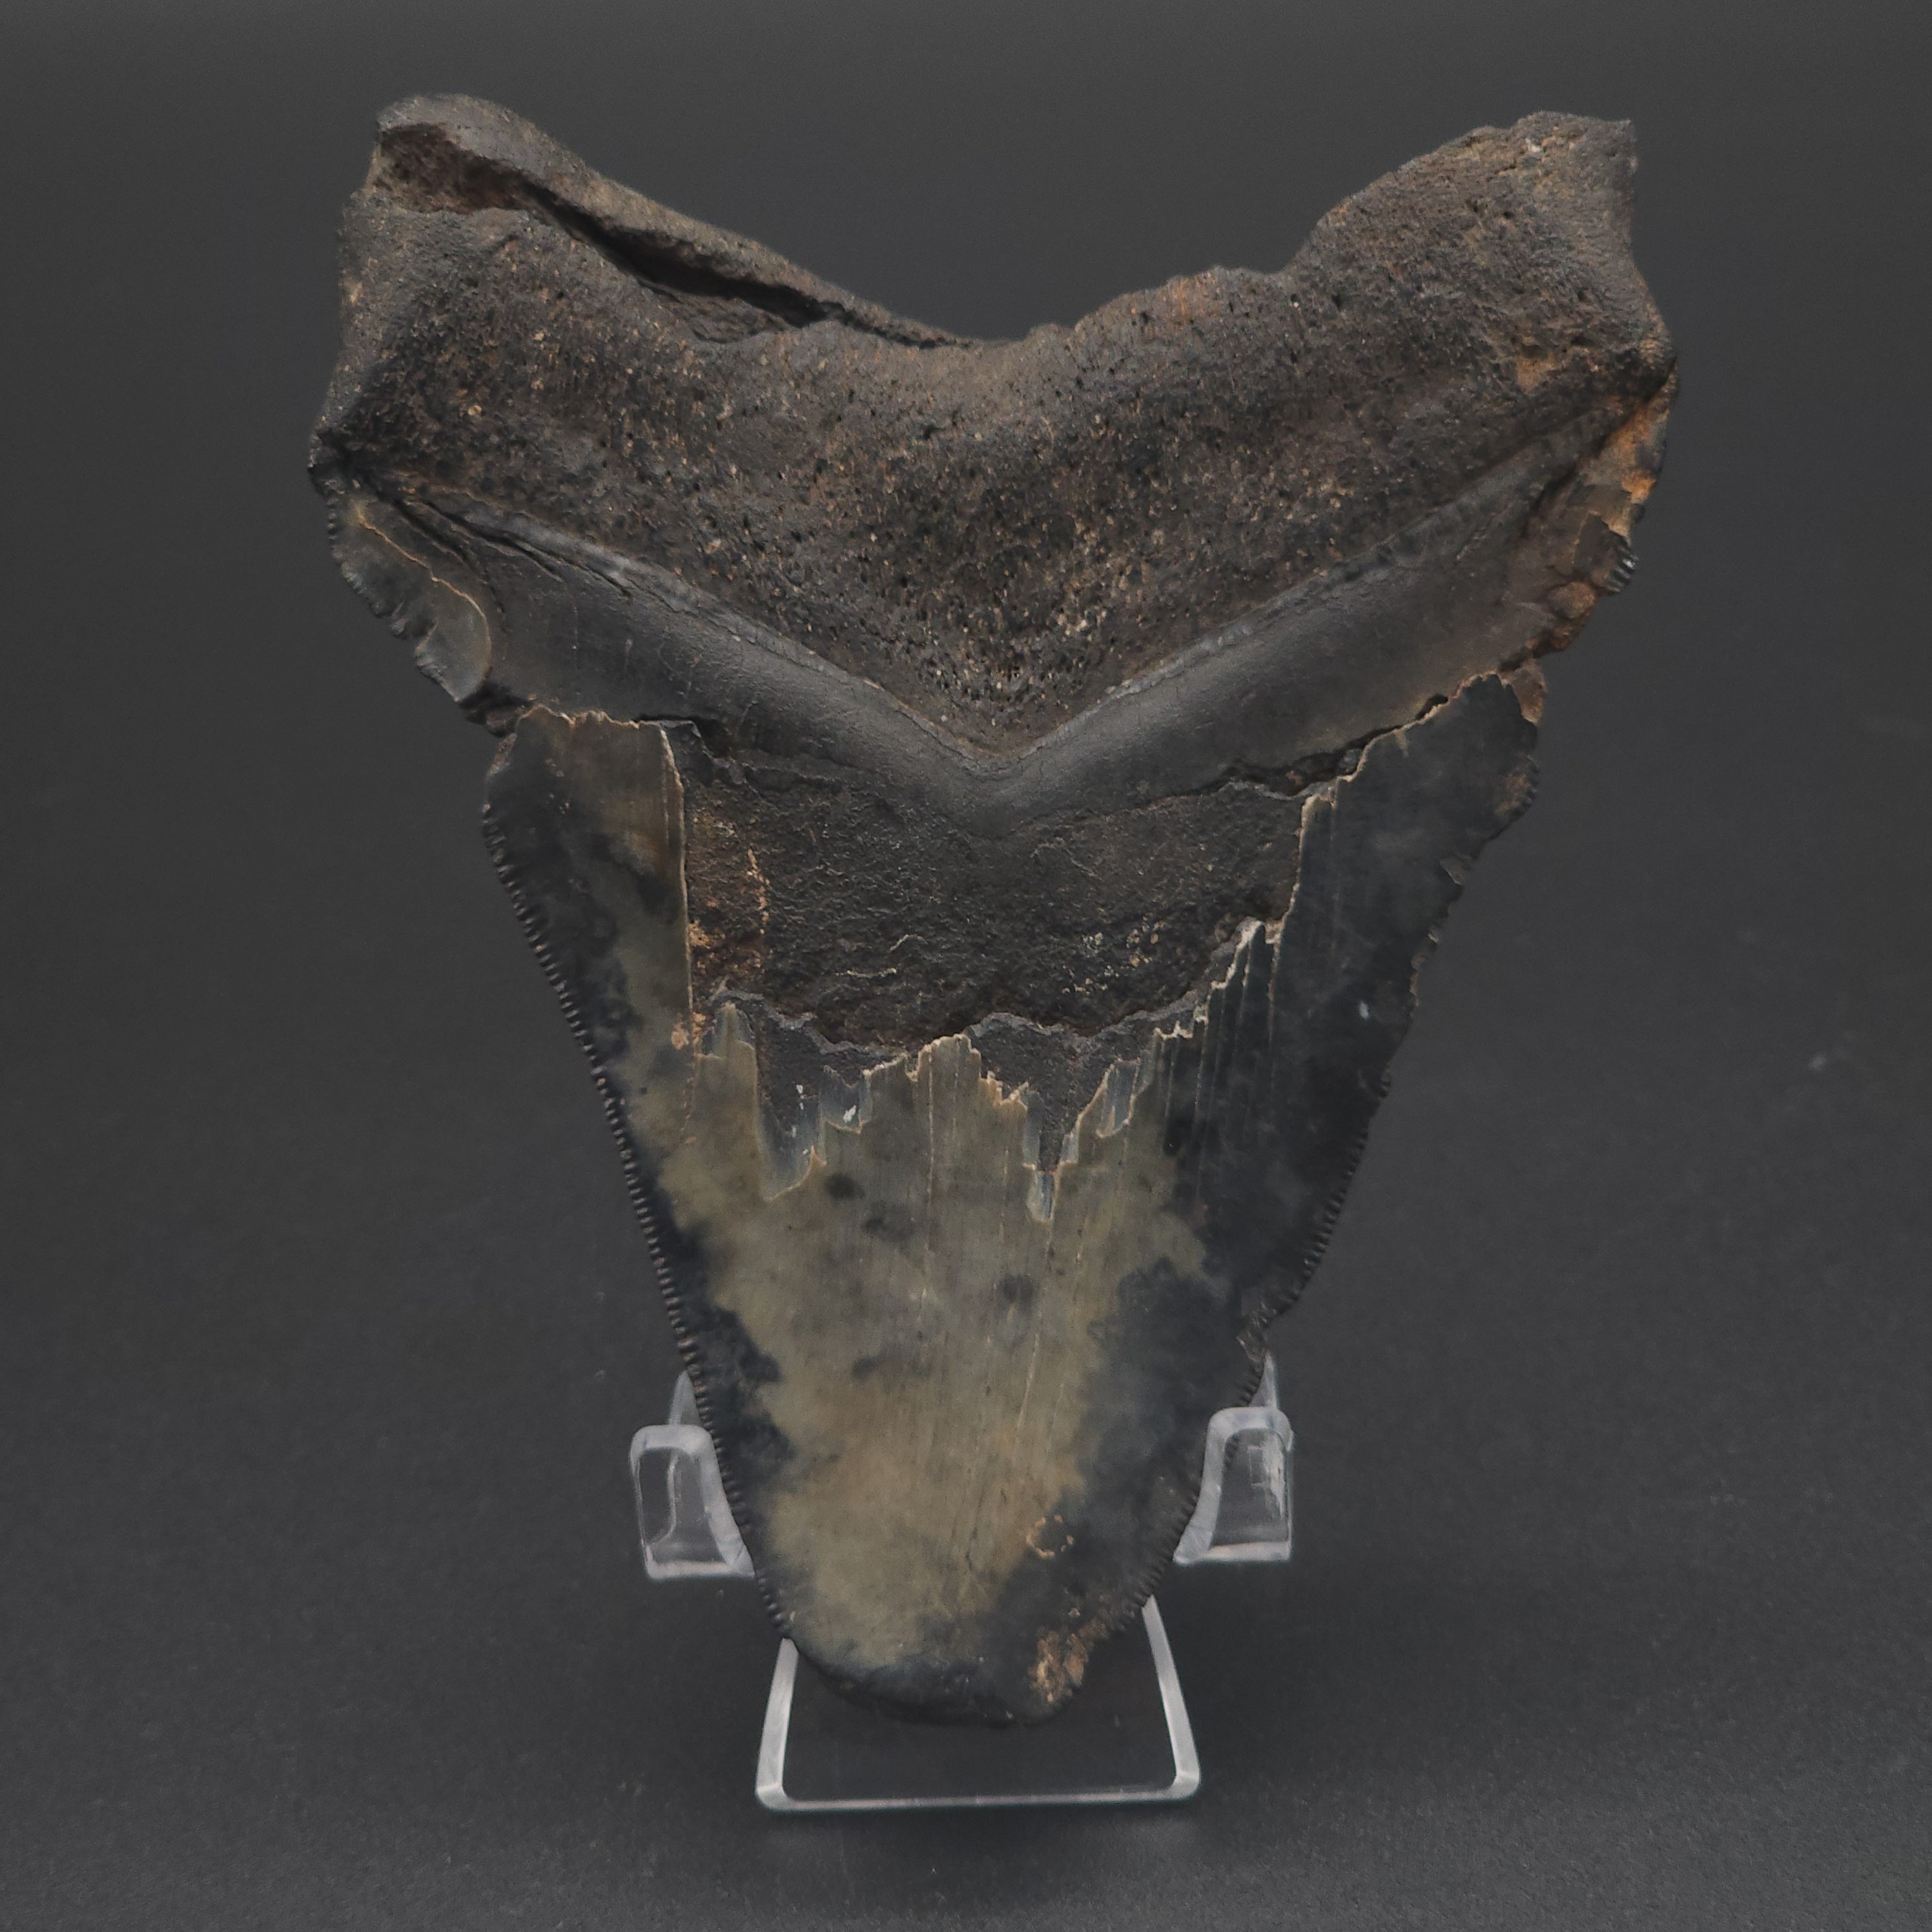 Megalodon Tooth - 4 5/8